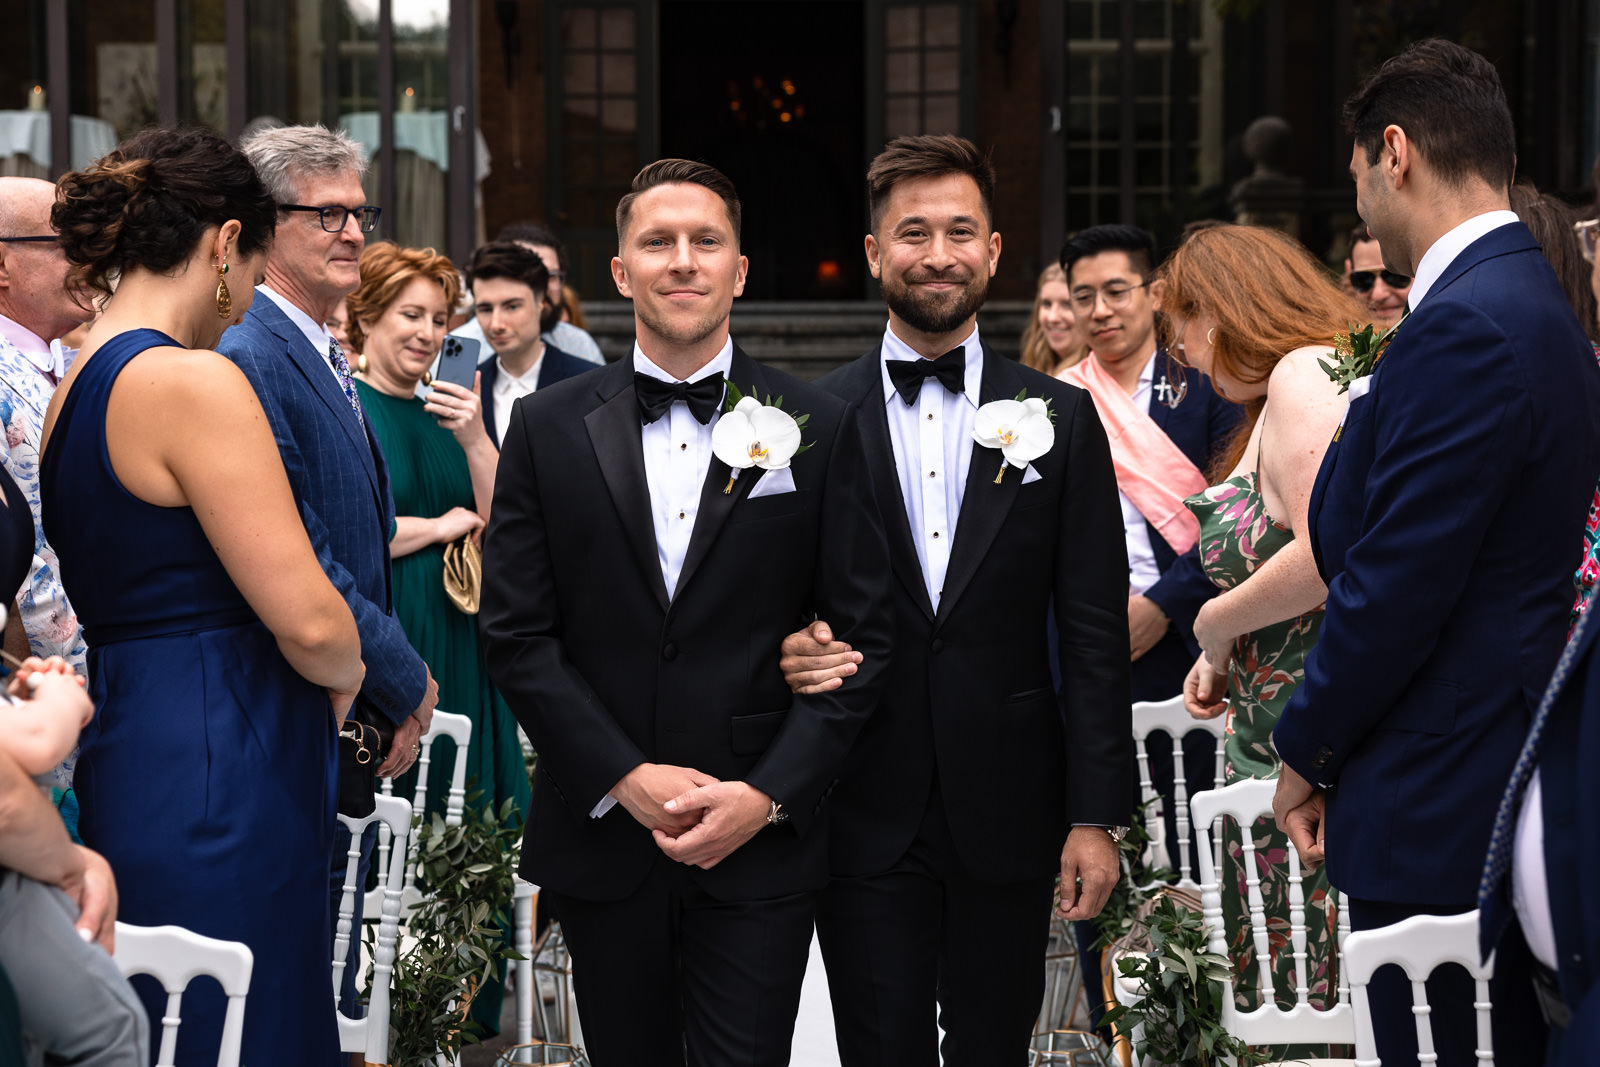 Two grooms walking down the isle together during same sex wedding